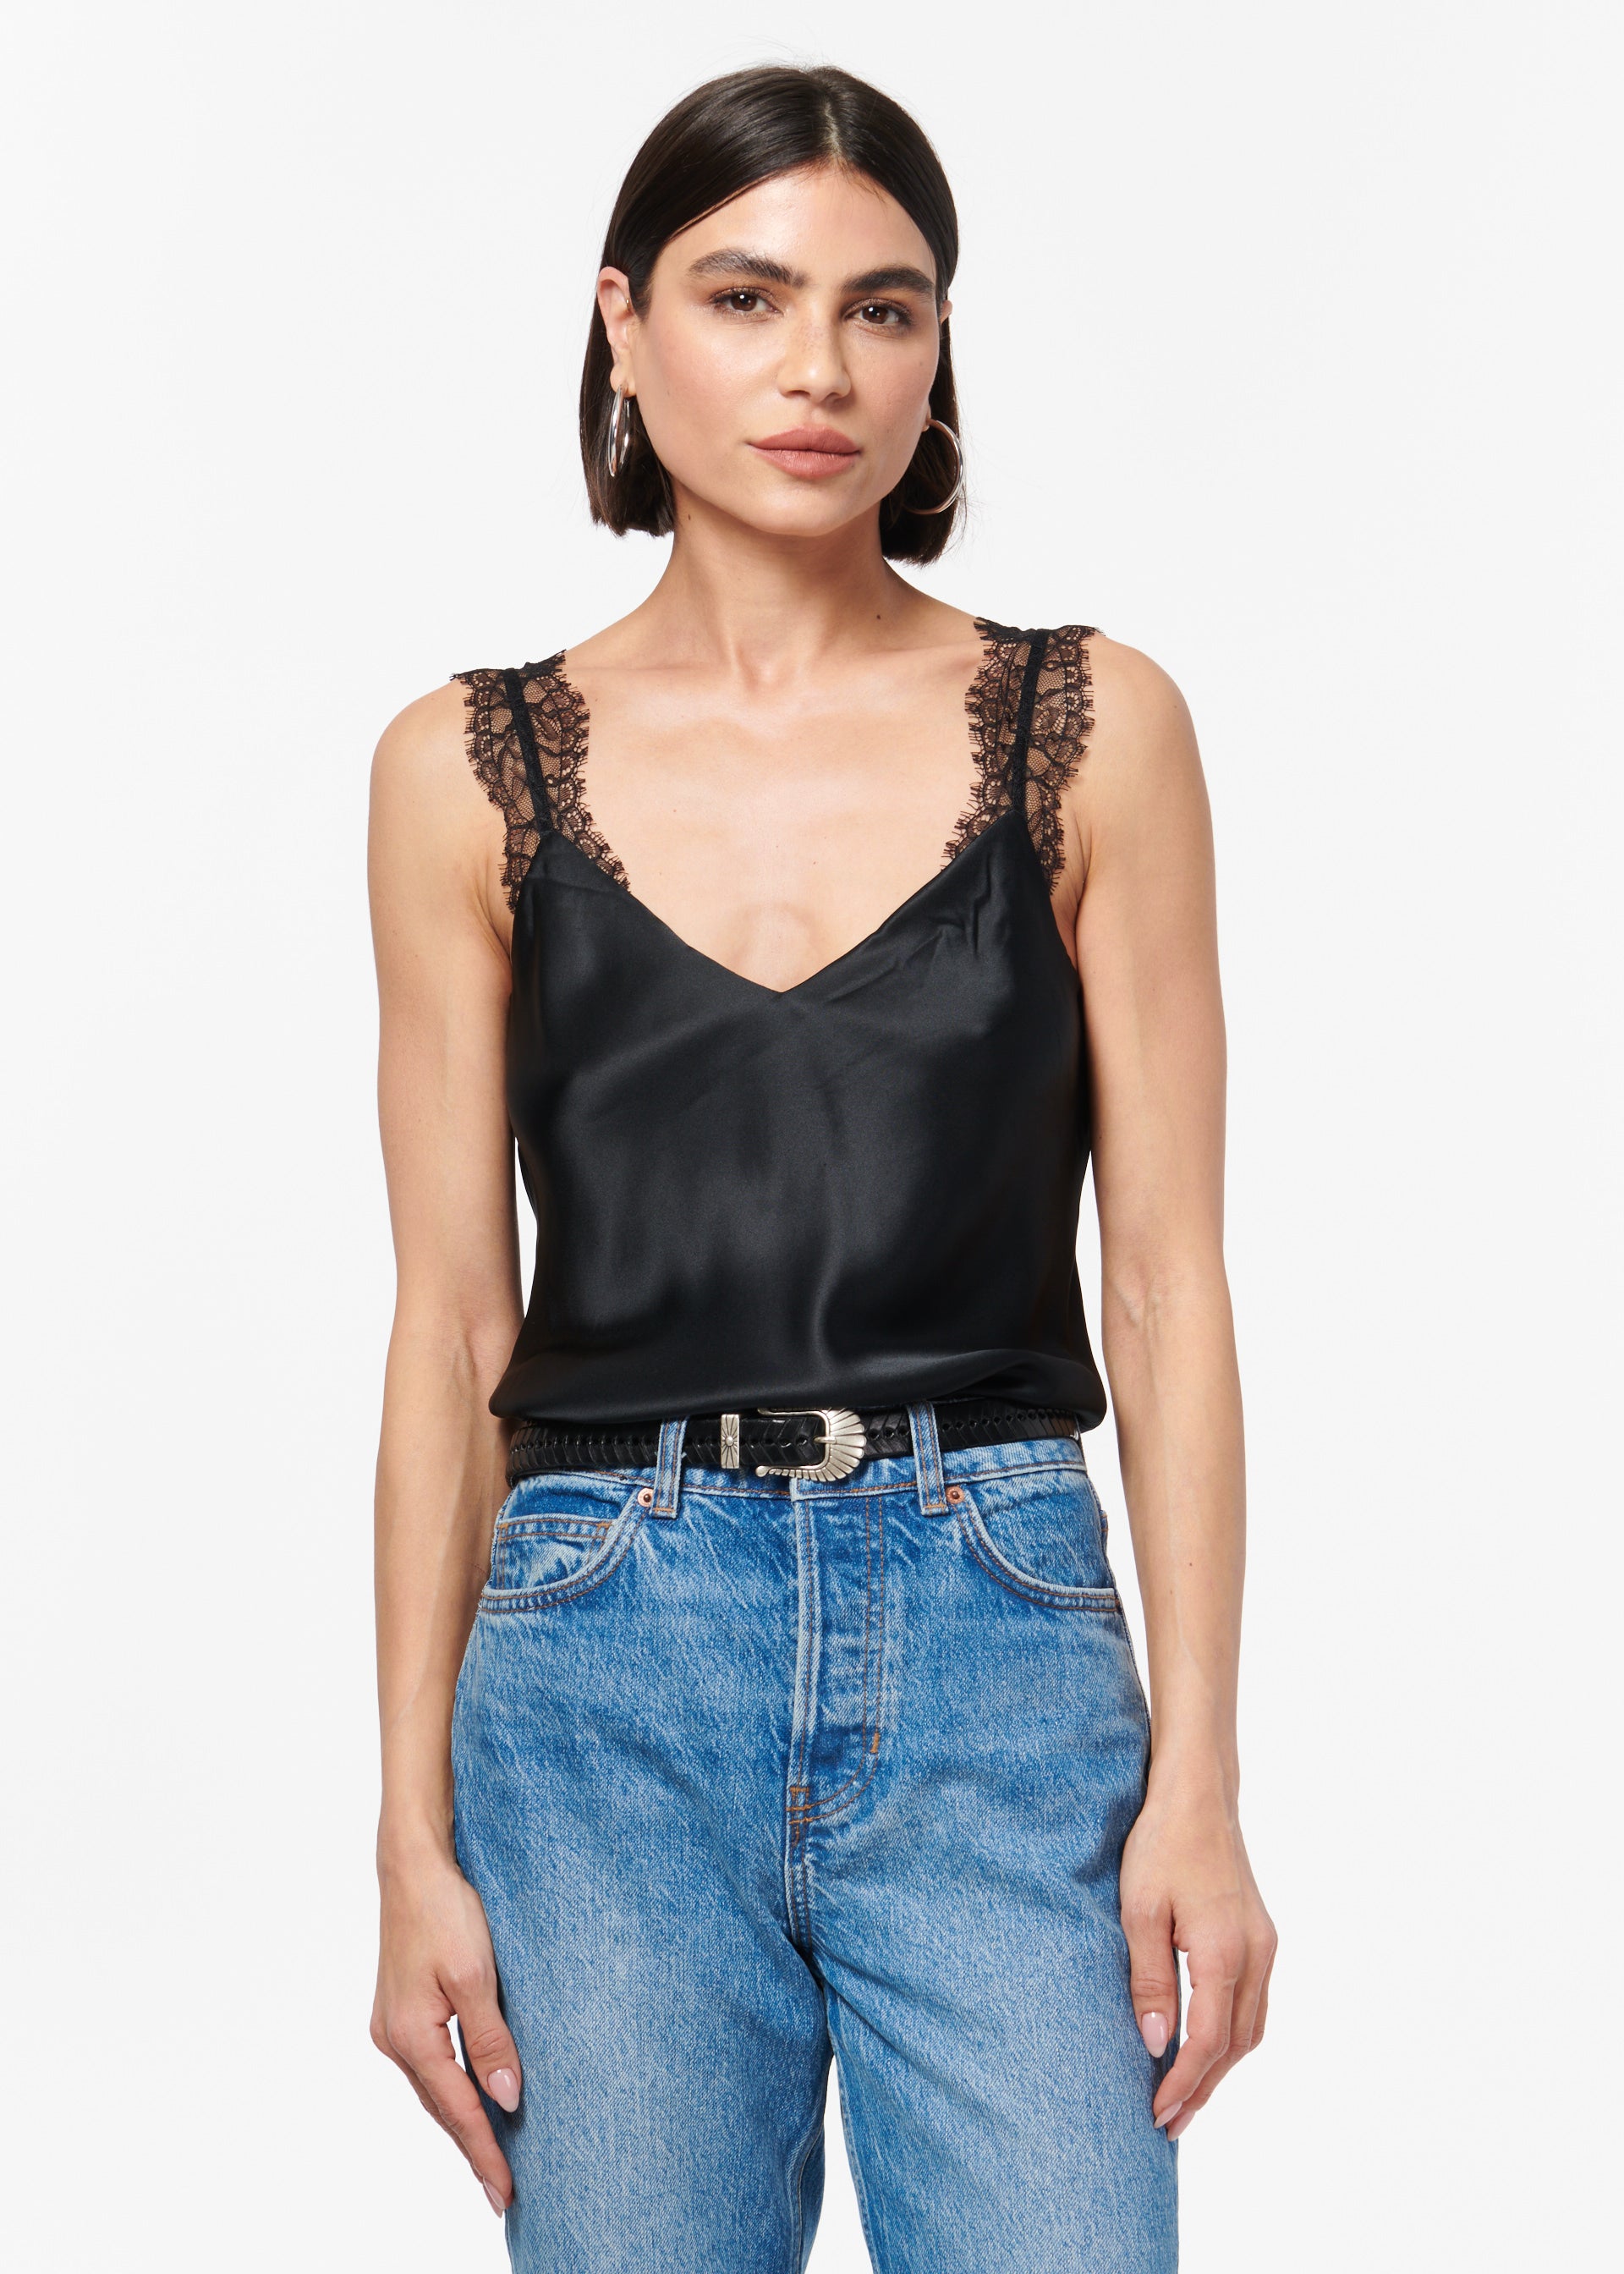 Cami NYC Helen Cami - Size S Available – Want Boutique Inc.